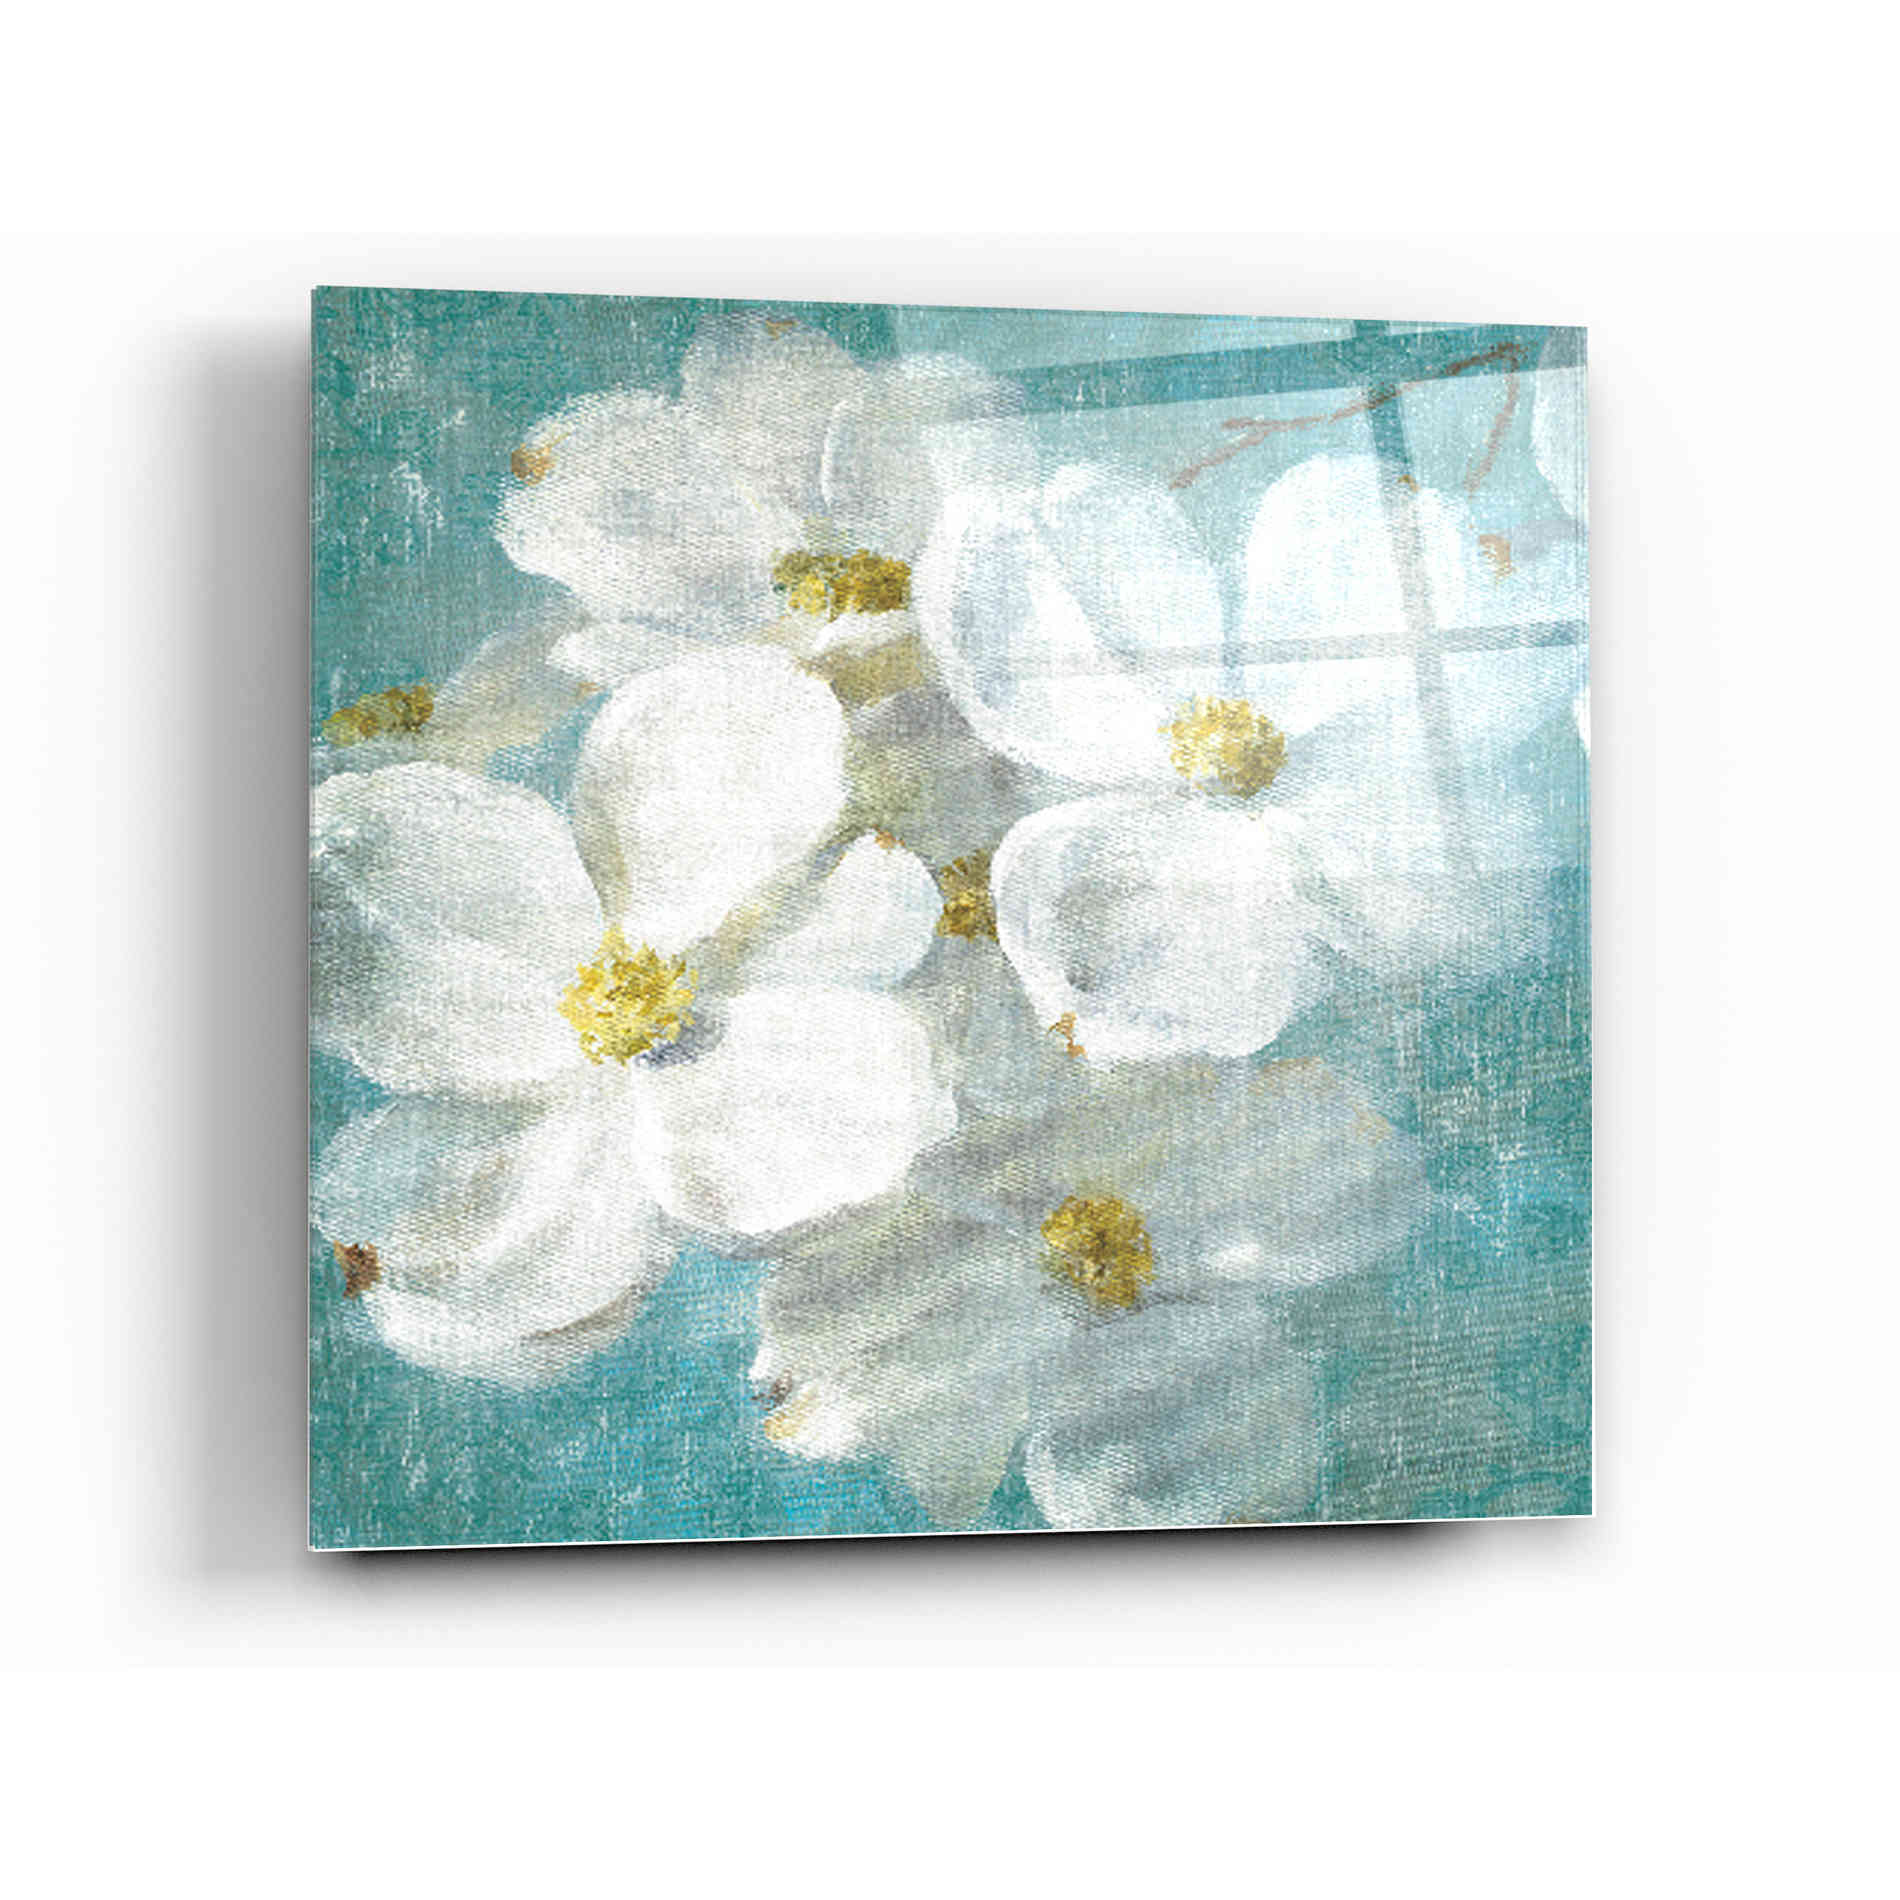 Epic Art 'Indiness Blossom Square Vintage II' by Danhui Nai, Acrylic Glass Wall Art,12x12